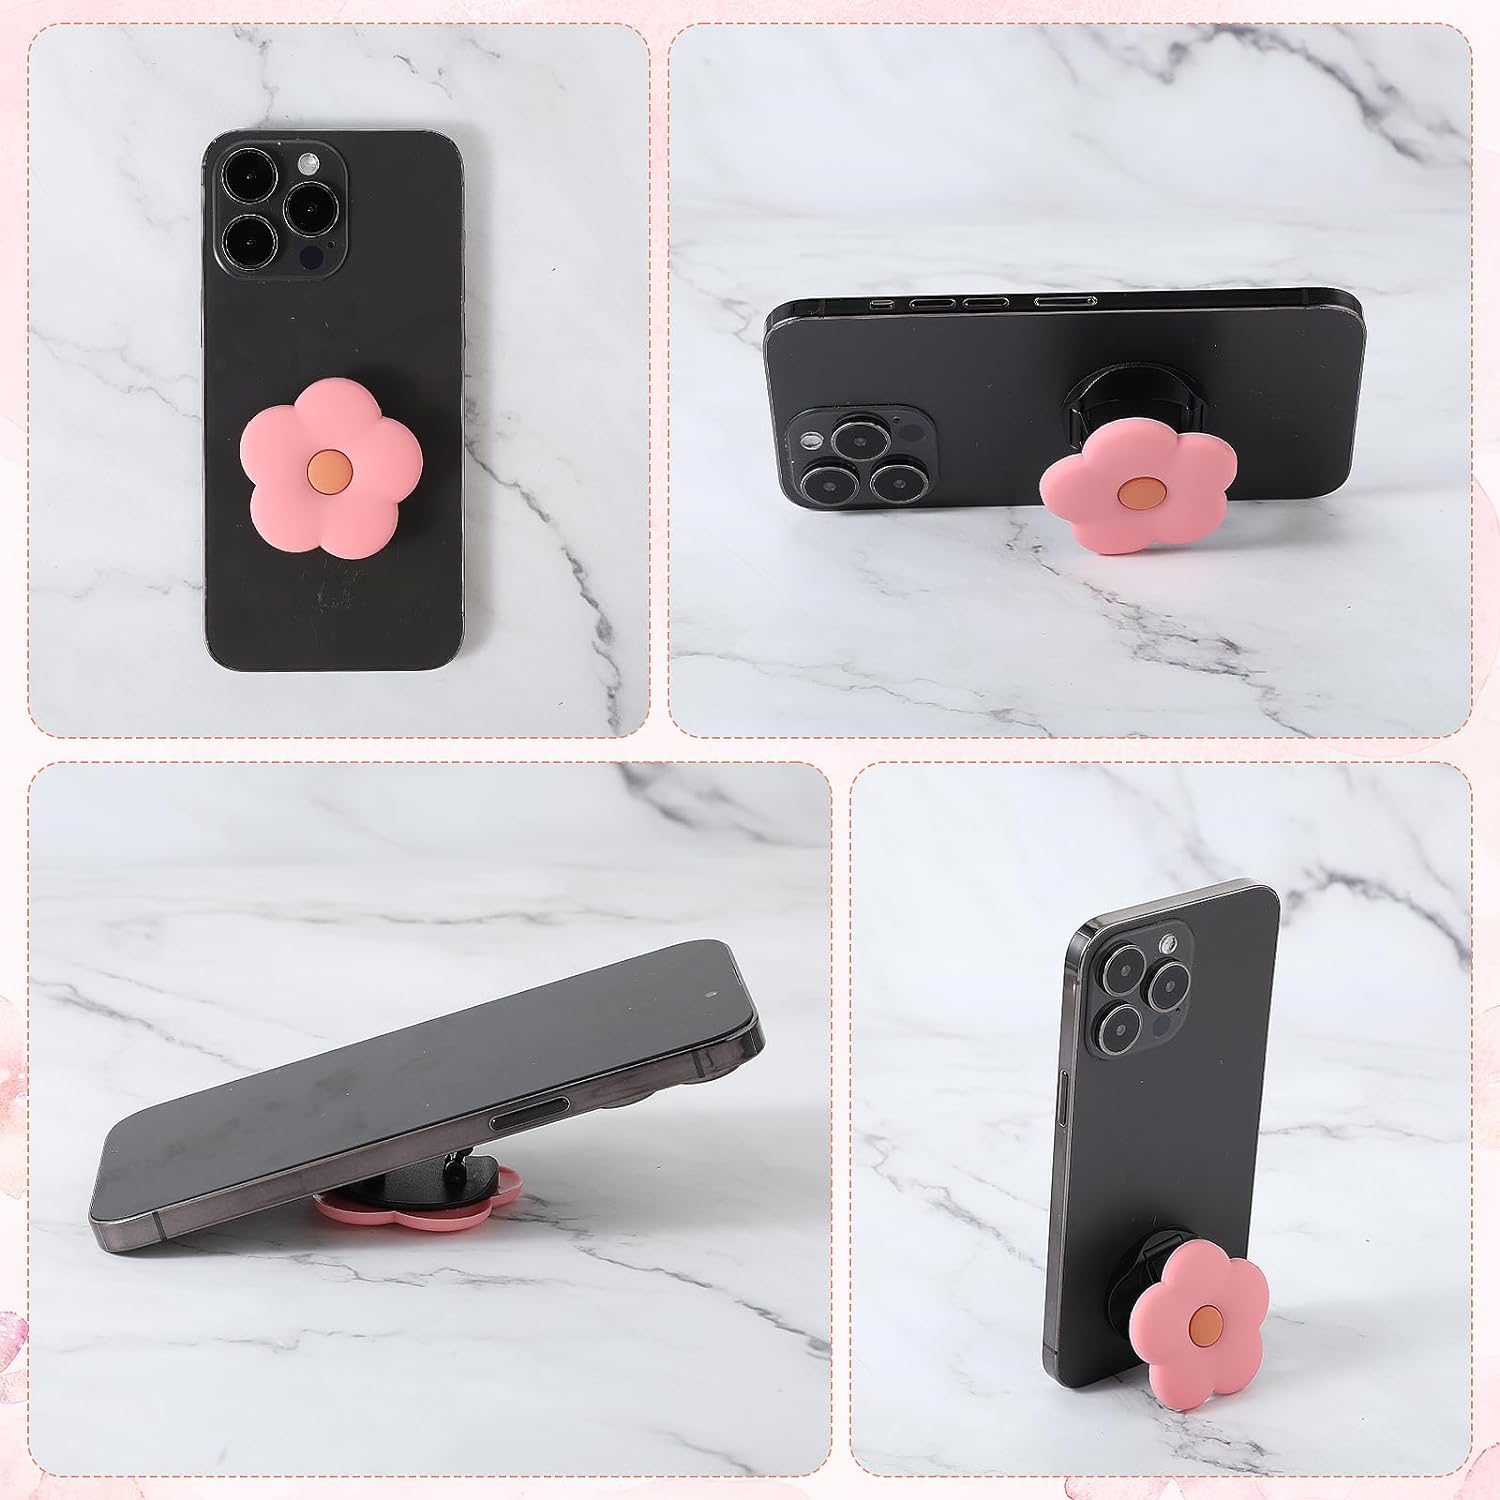 Ouligay Pink Daisy Silicone Mobile Phone Grip Stand, Cute 2d Flower Cell Phone Holder, Collapsible Expandable Cell Phone Accessory For Smartphone Tablet Cell Phone Accessory - Amazing Gadgets Outlet